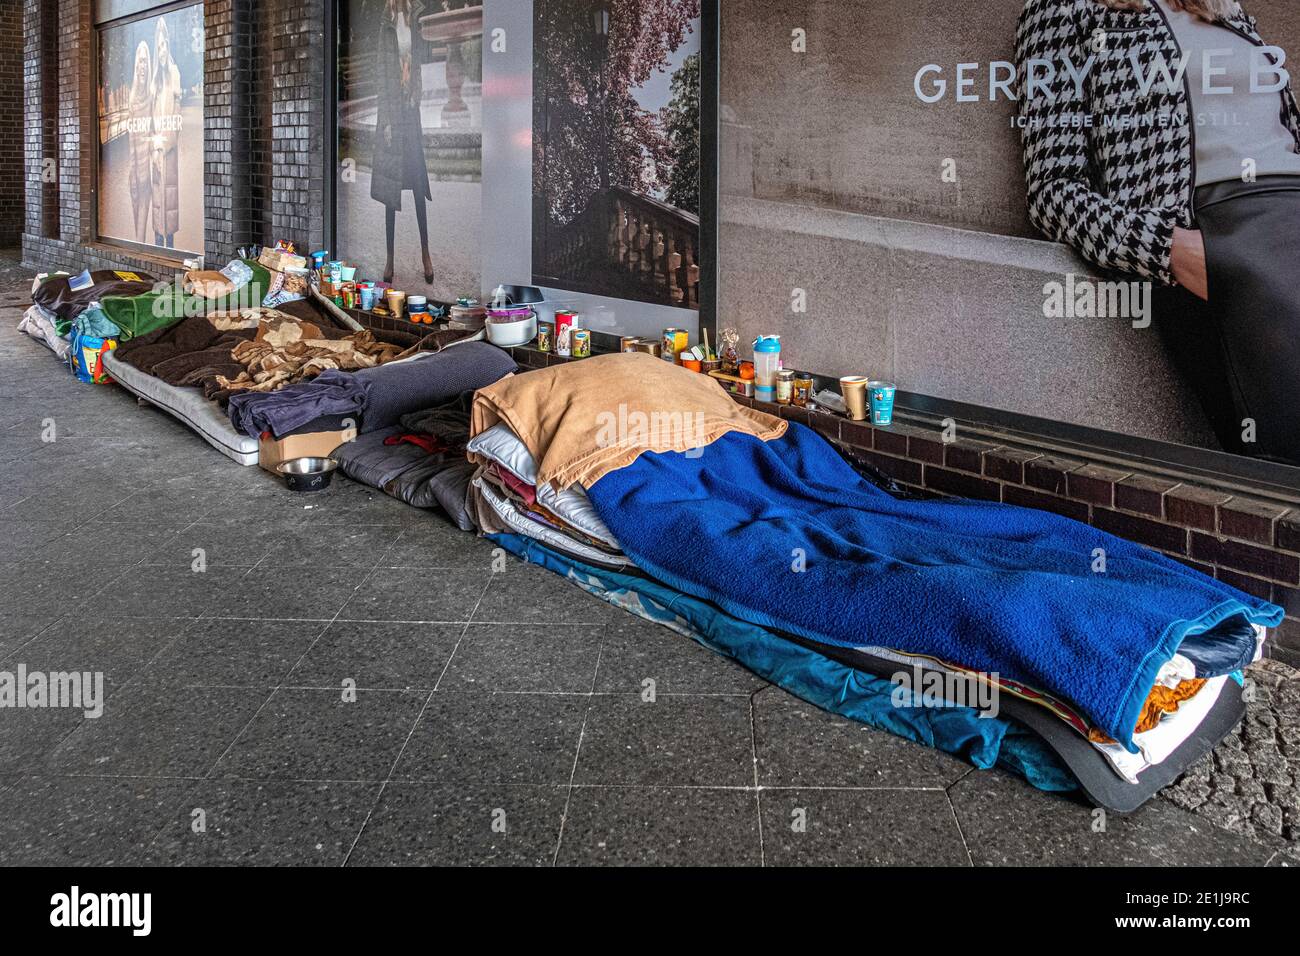 Possessions of the homeless on pavement outside Friedrichstrasse railway station, Mitte,Berlin. Beds, bedding & food supplies on pavement Stock Photo